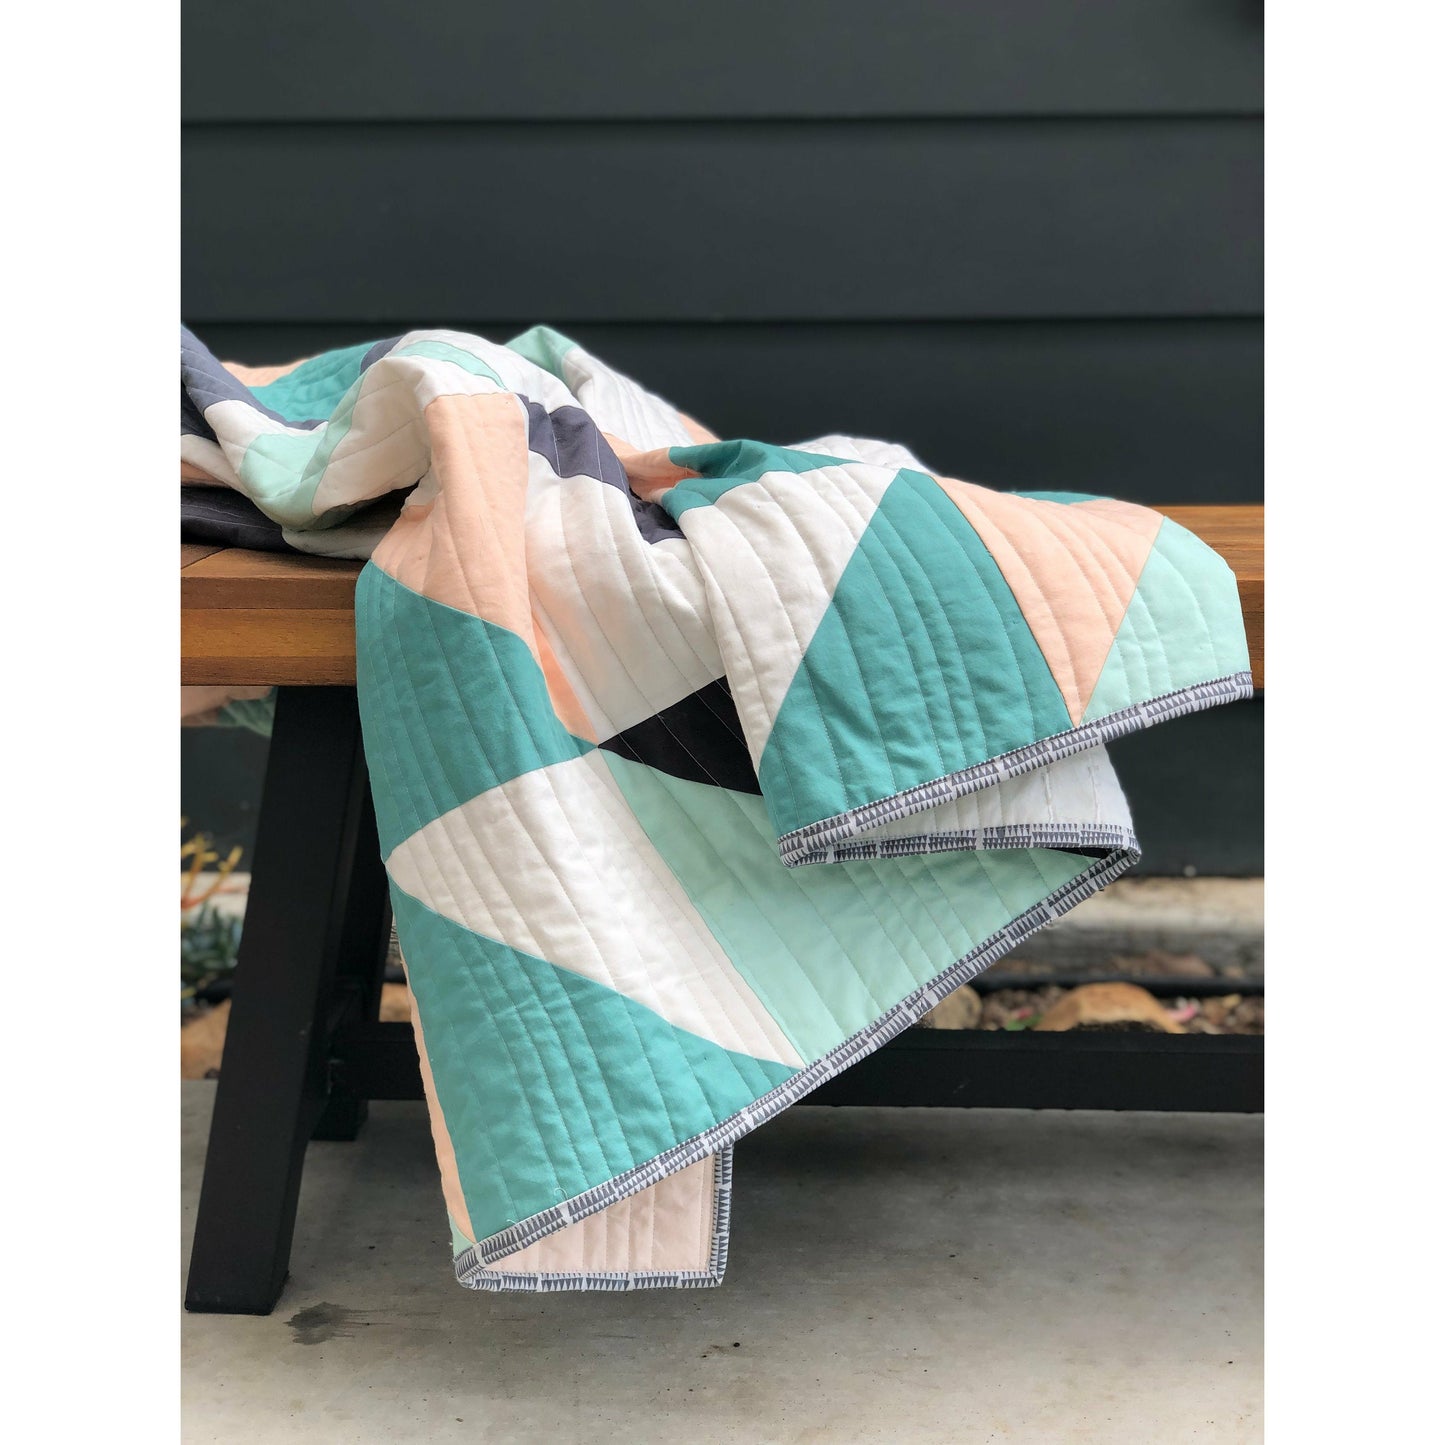 Road Trip Quilt Pattern - New and Improved with a BONUS throw pillow size!